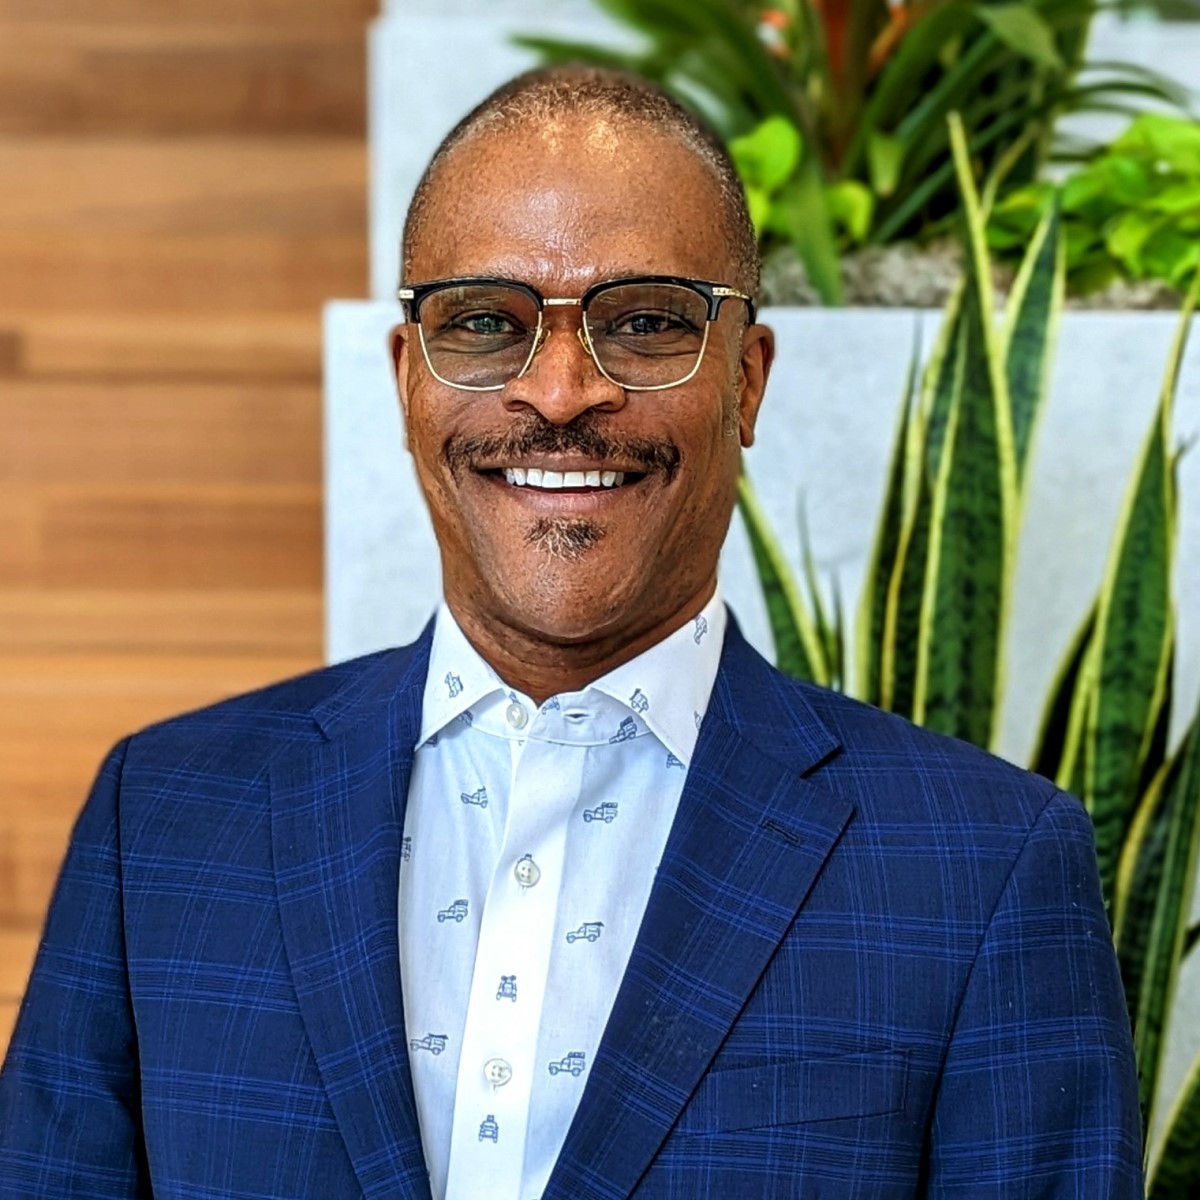 A Black man with a moustache and very short hair, photographed from the chest up in a blue suit jacket and white shirt.